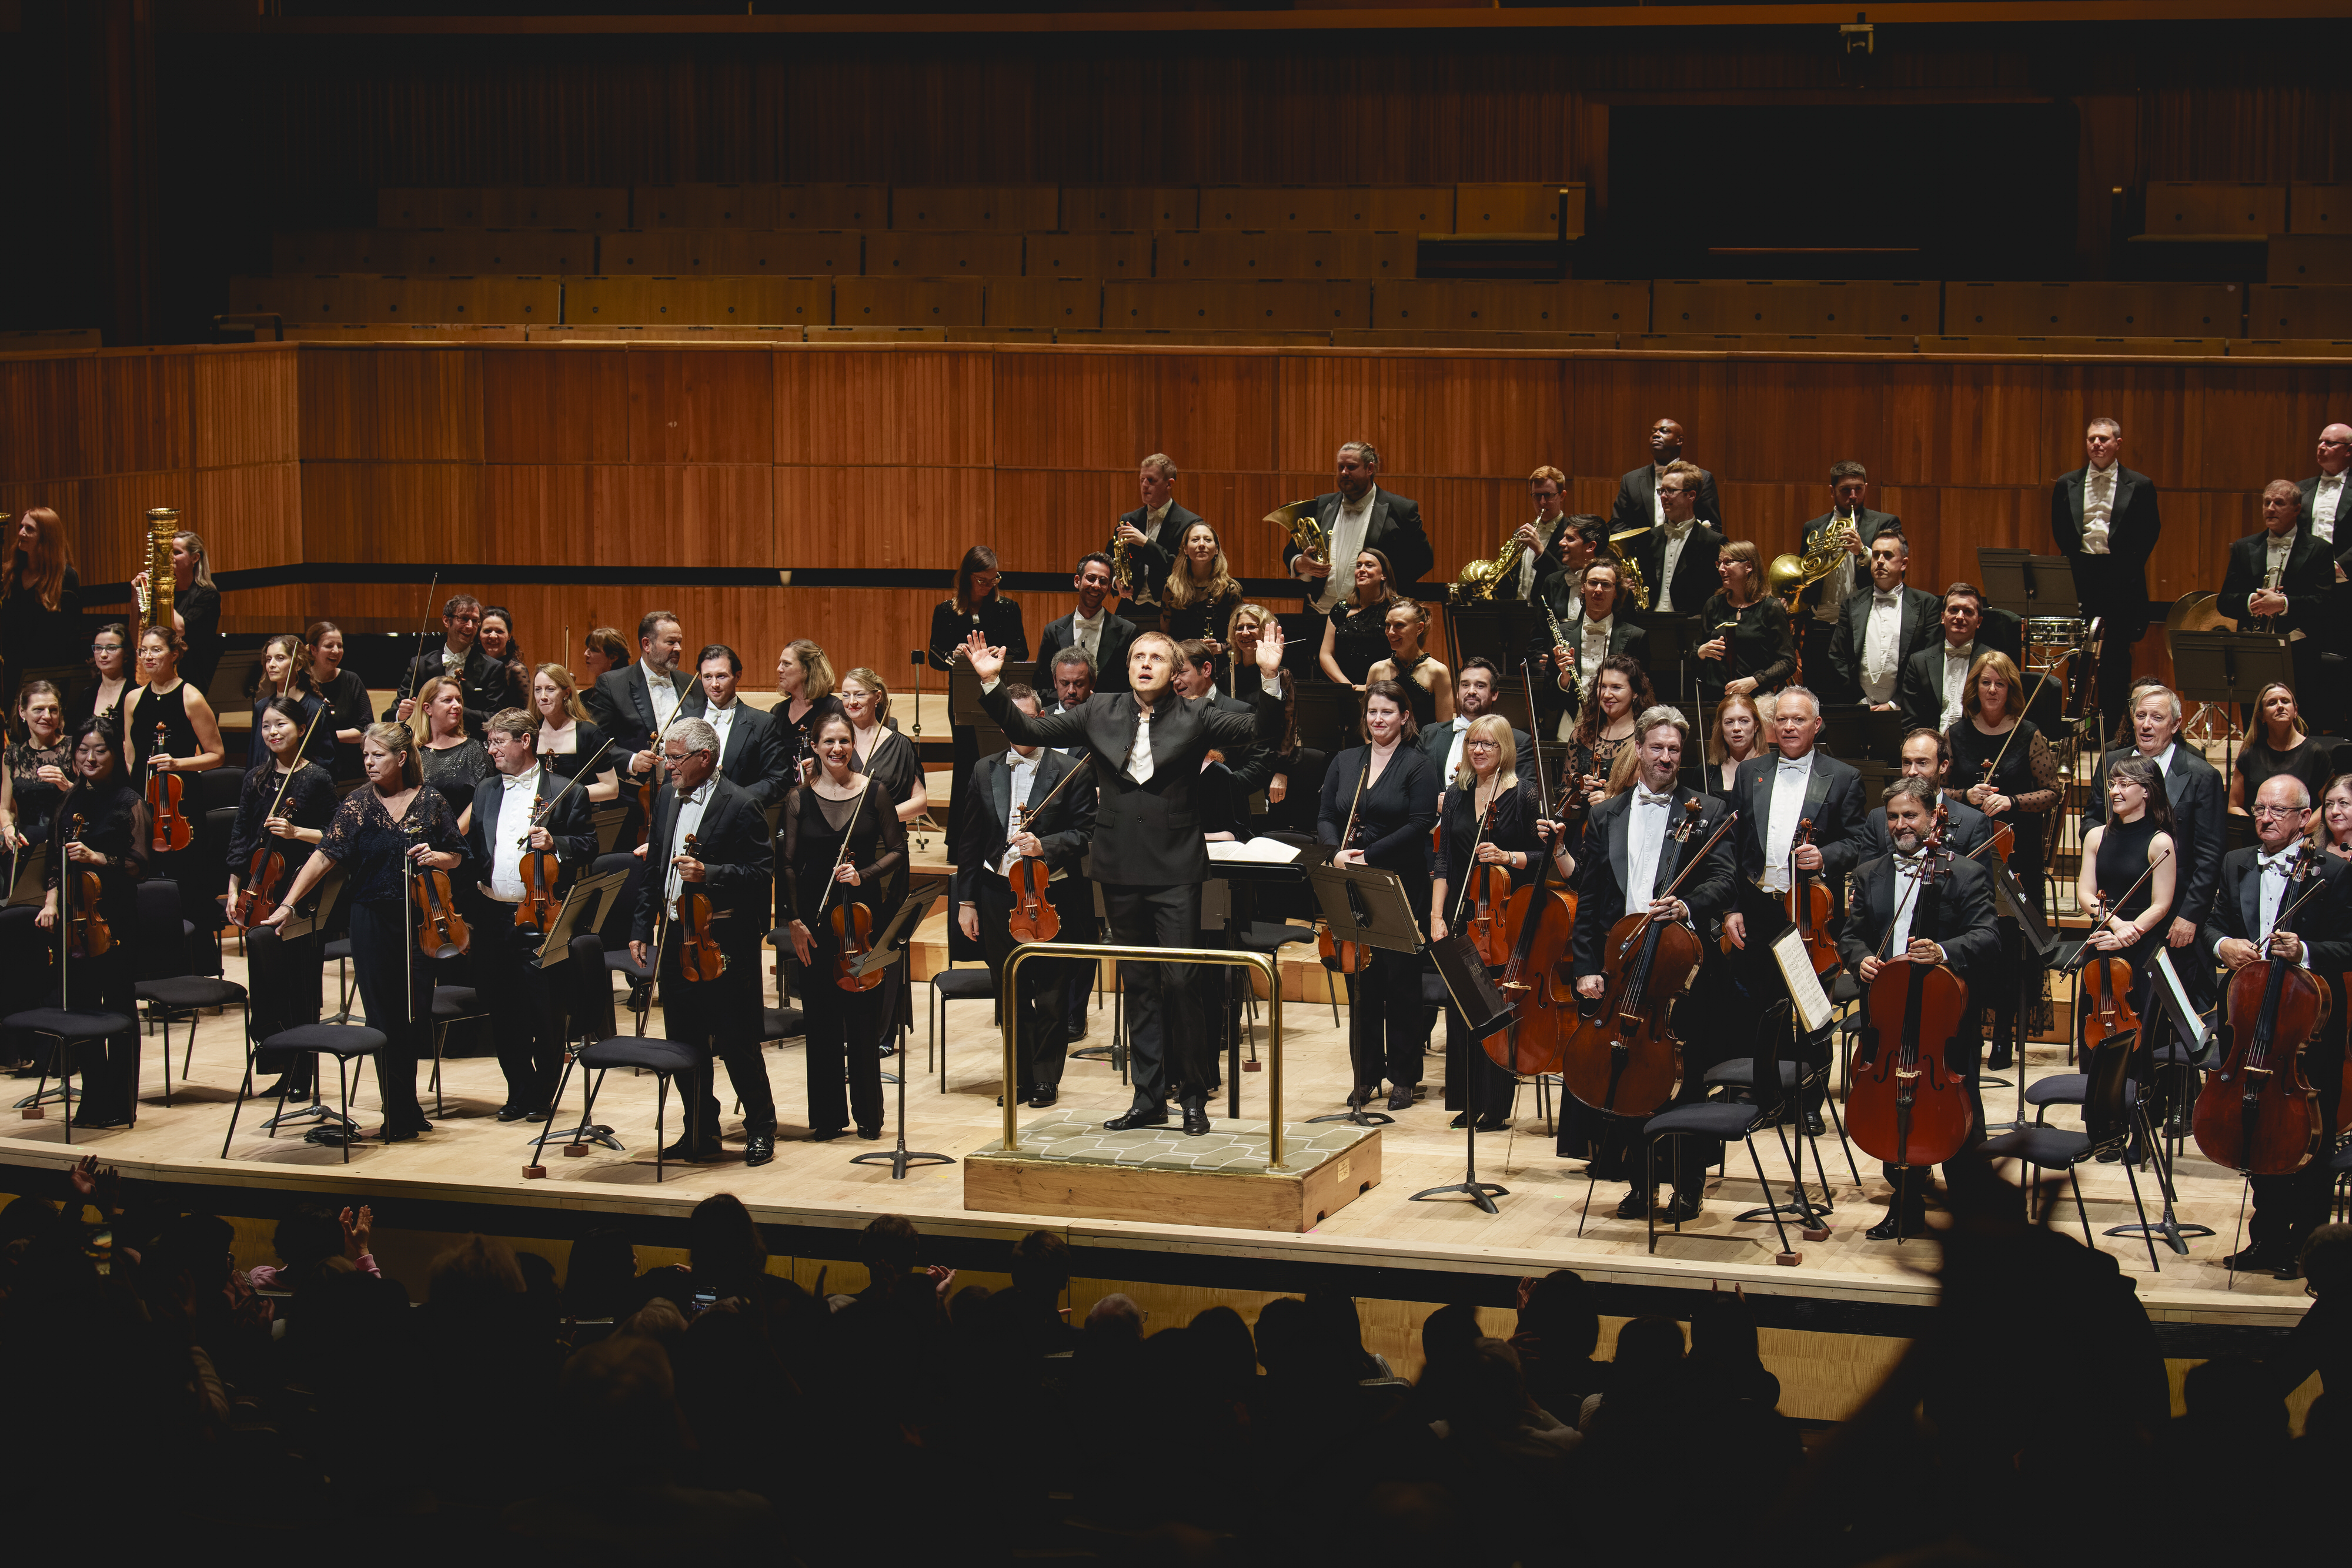 The RPO and Vasily Petrenko recieving applause on stage